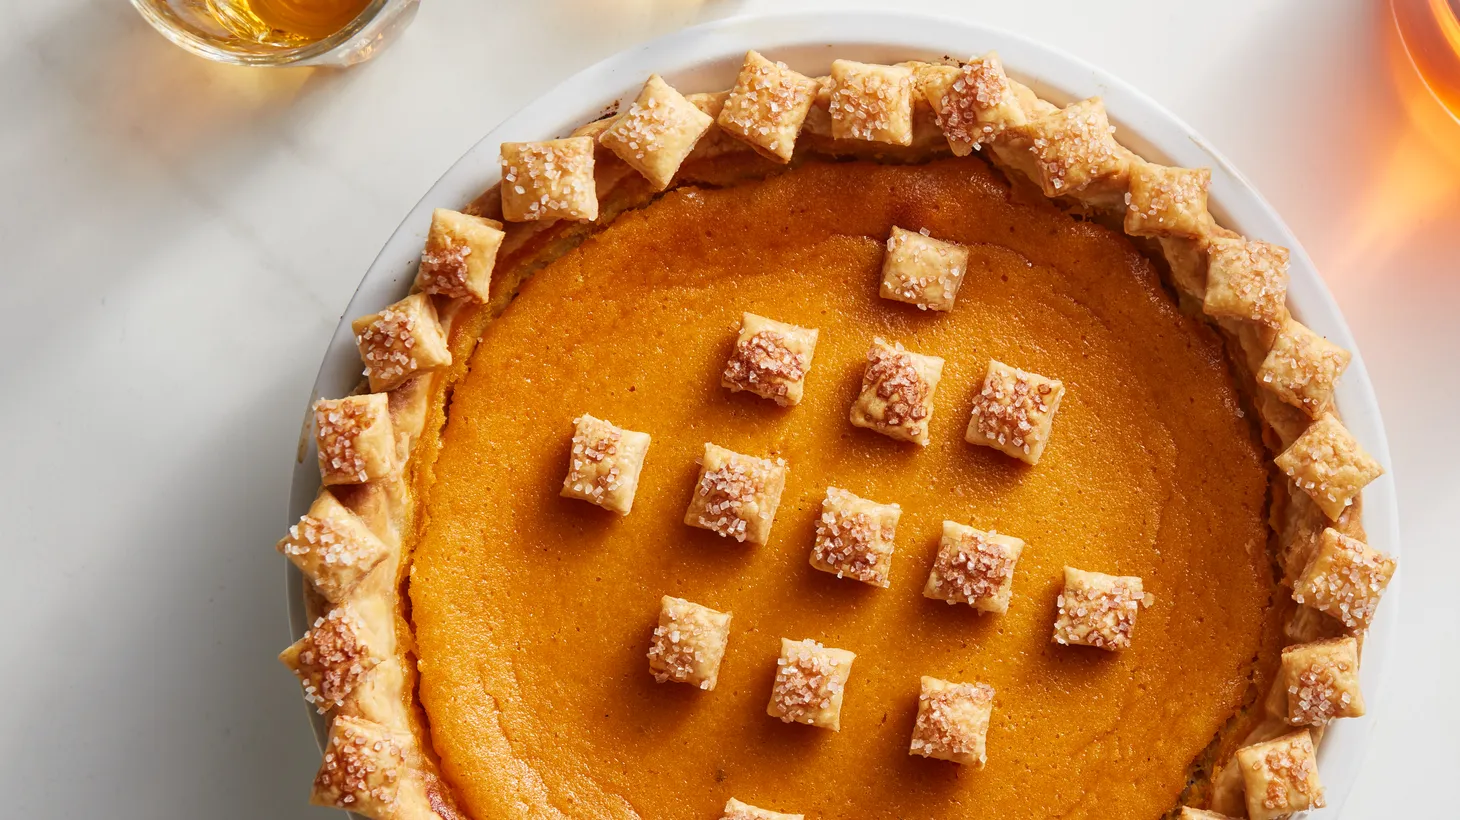 Genevieve Ko jazzes up her roasted sweet potato pie with doses of nutmeg while replacing standard evaporated milk with heavy cream (and some rum) for a dessert that moves easily from Thanksgiving to Christmas.